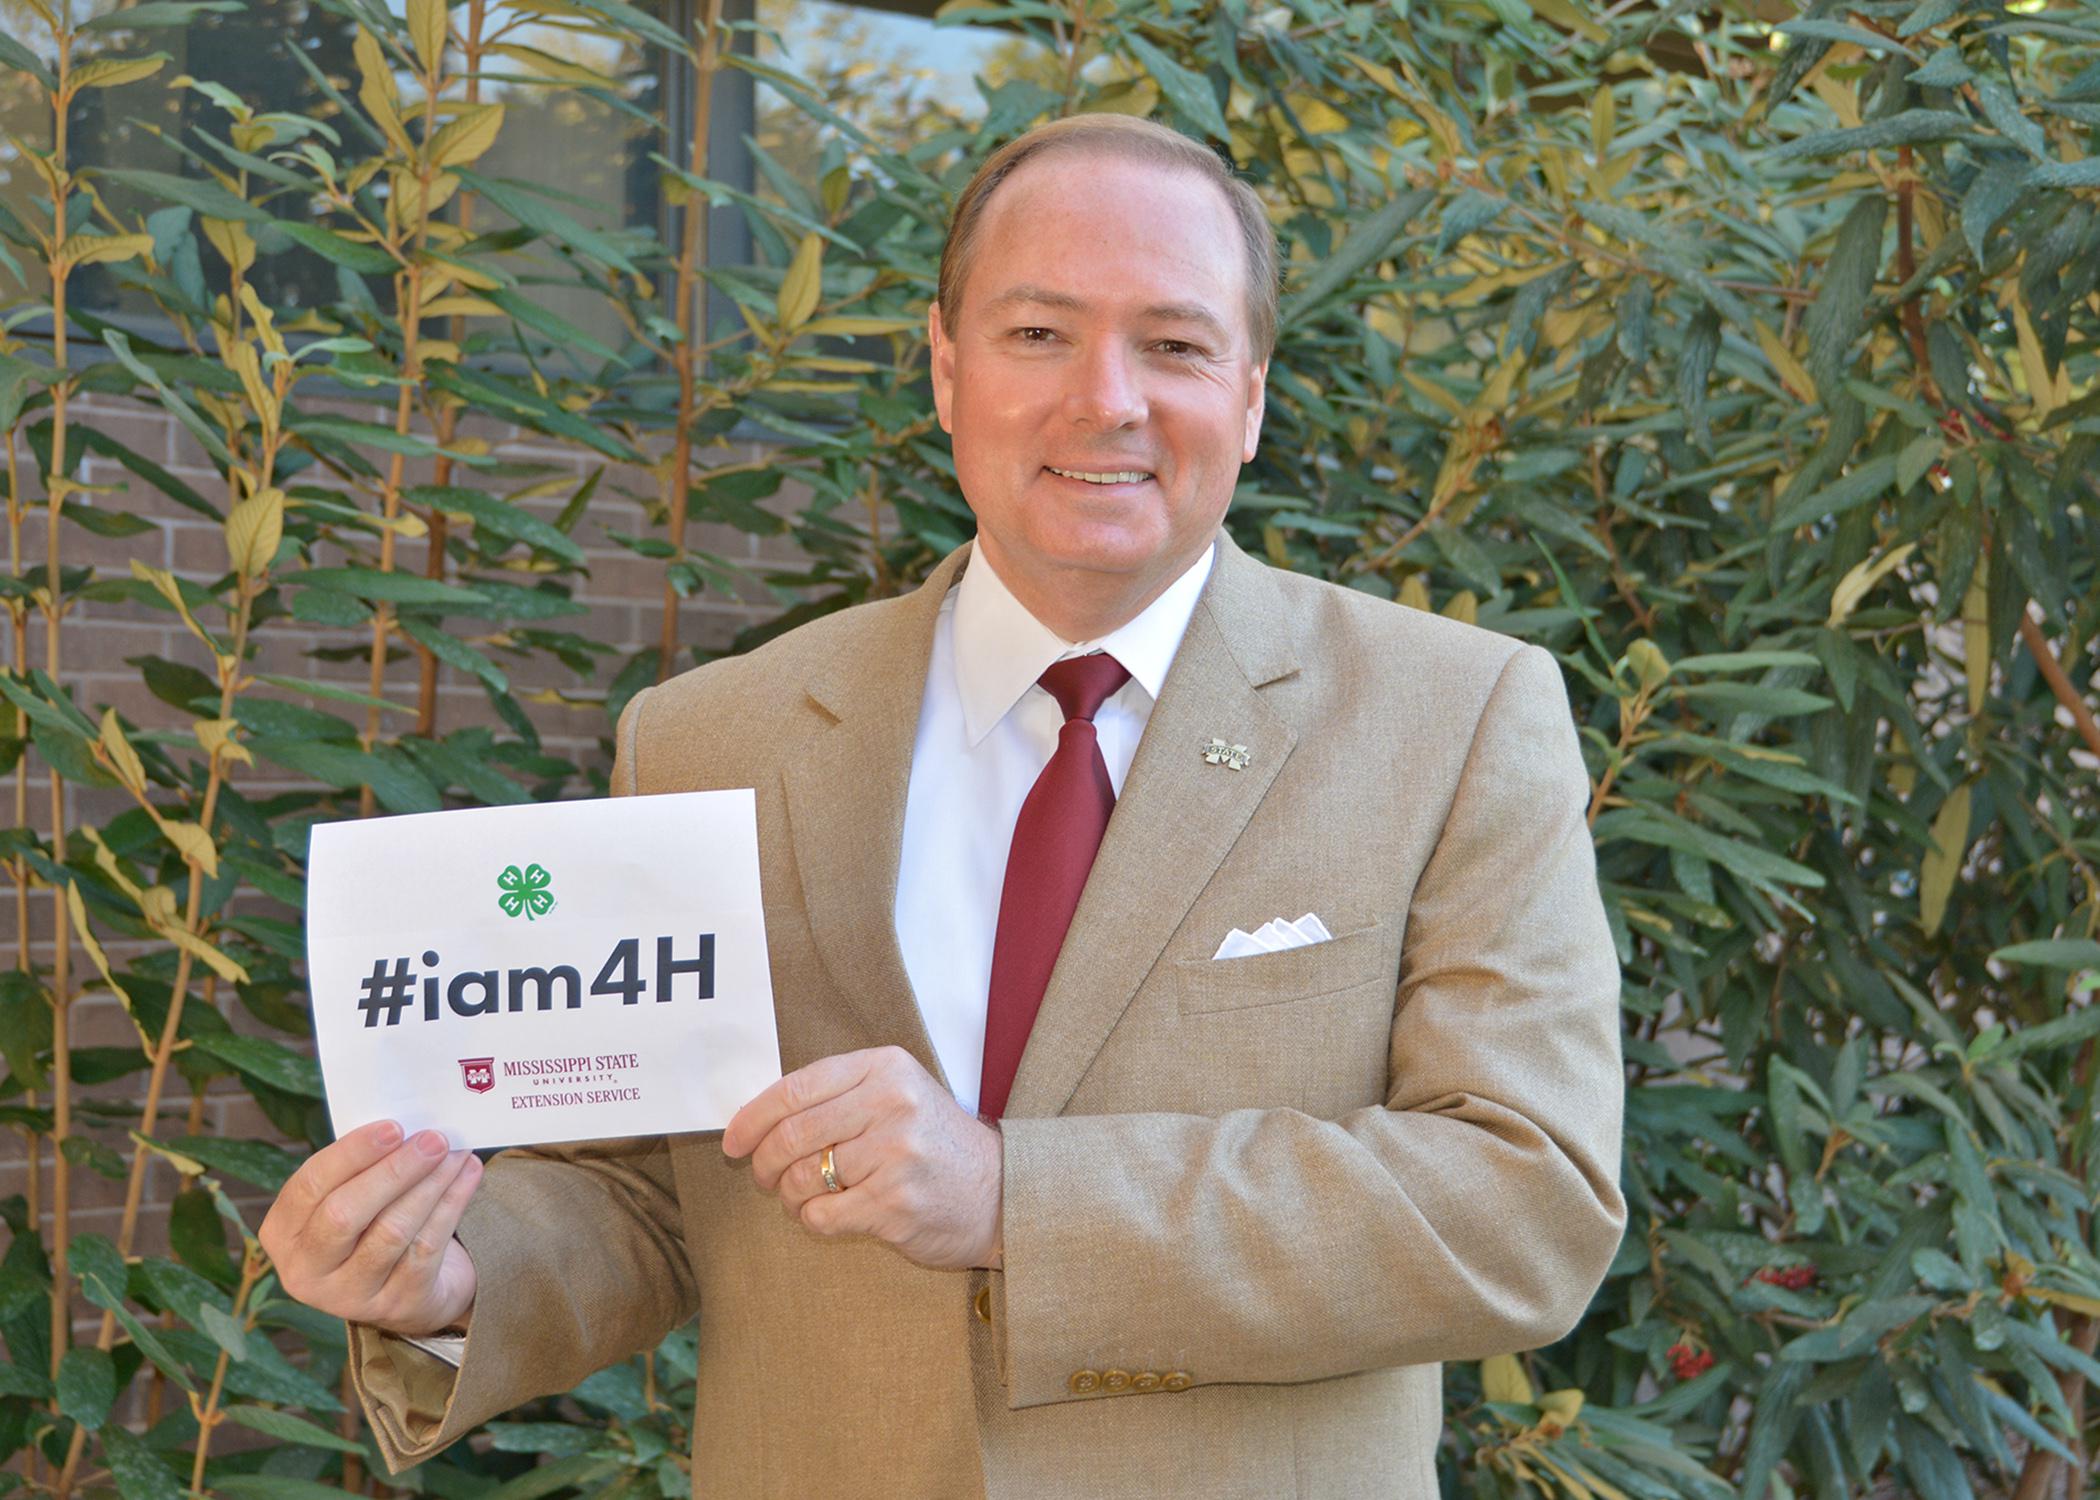 Mississippi State University President and 4-H alumnus Mark Keenum encourages current and former members of the state's 4-H Youth Development program to participate in the upcoming National 4-H Week's #iam4H campaign set for Oct. 5-11, 2014. (Photo by MSU Ag Communications/Linda Breazeale)